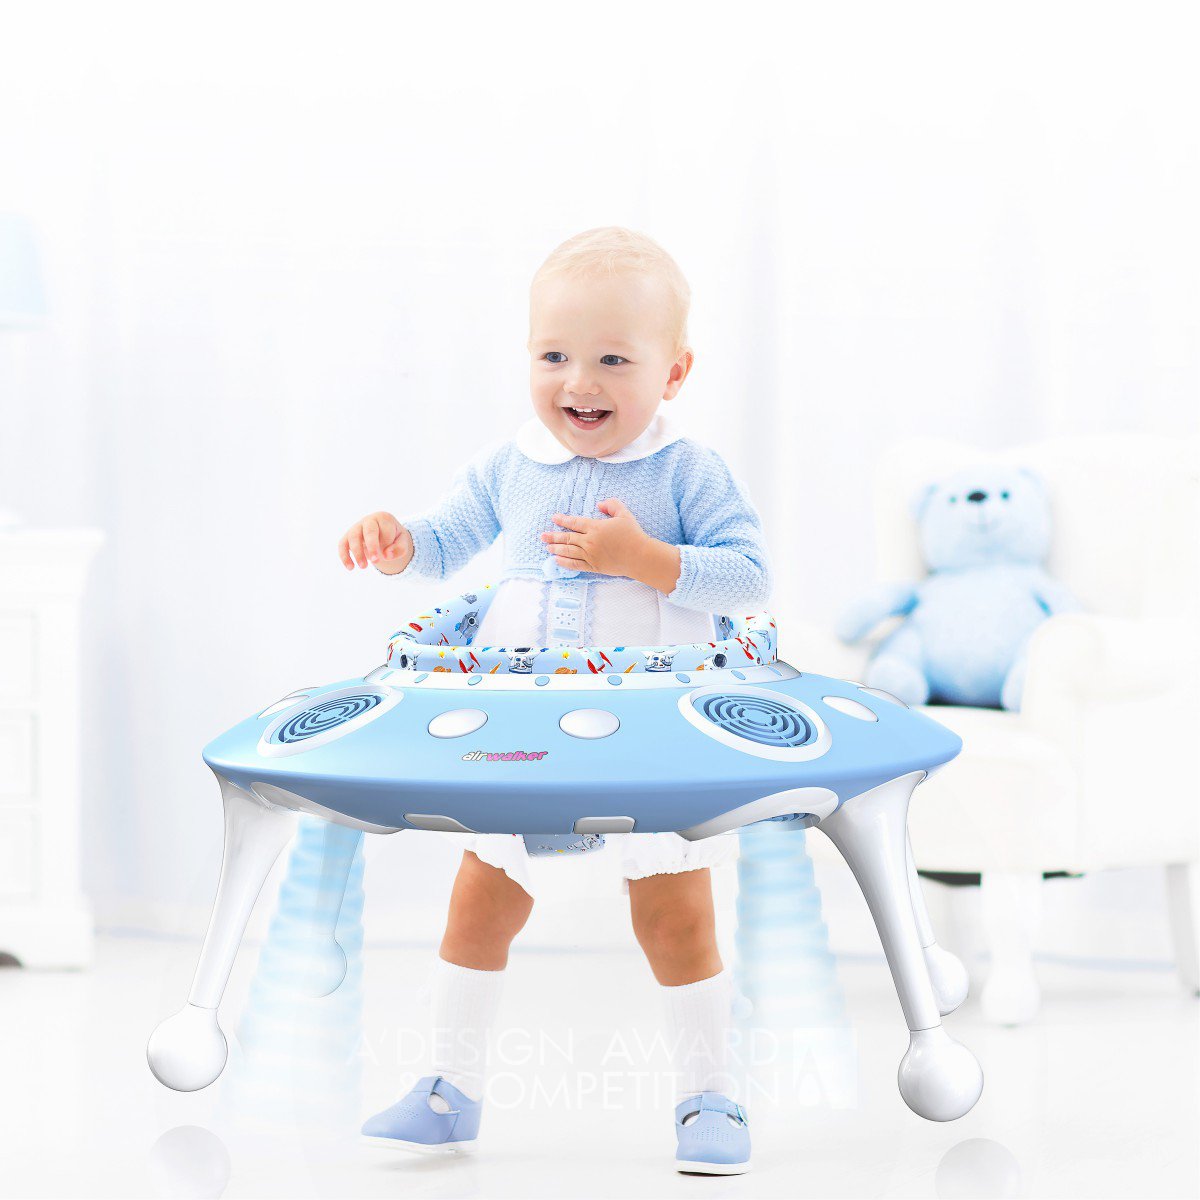 Satyakam Sharma wins Iron at the prestigious A' Baby, Kids and Children's Products Design Award with AirWalker Infants Walker .